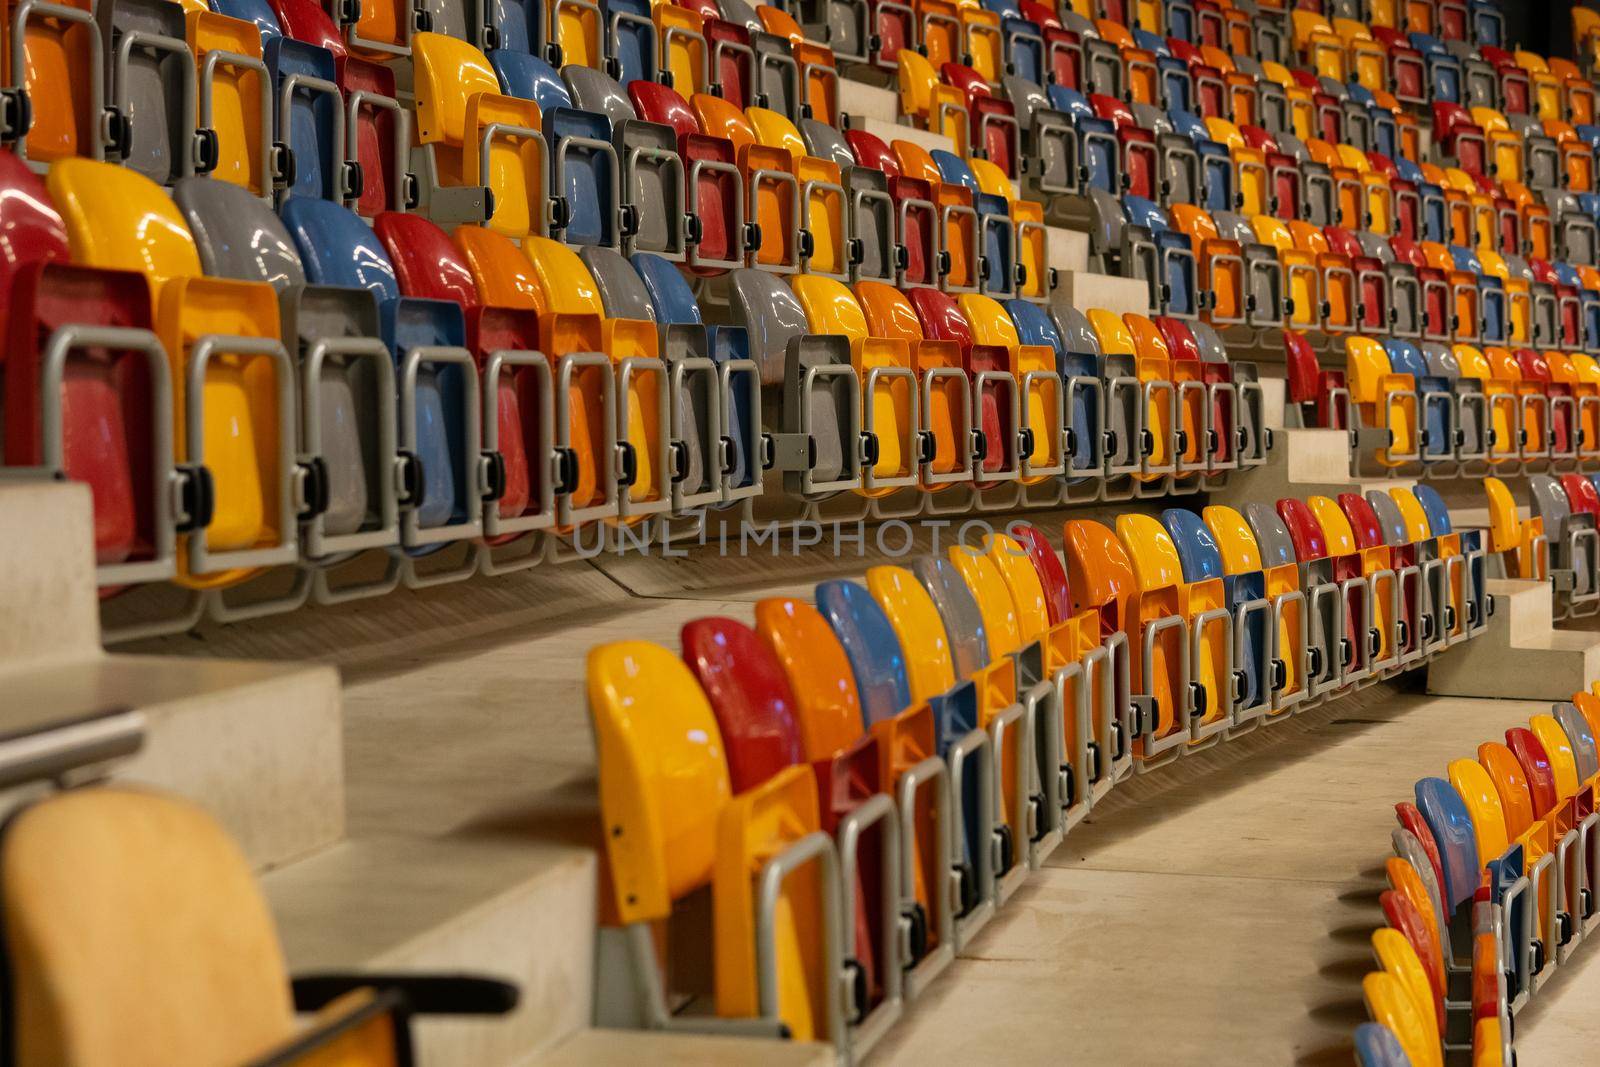 Rows of folded, green, blue, yellow, green and orange plastic seats in a very big, empty indoor stadium